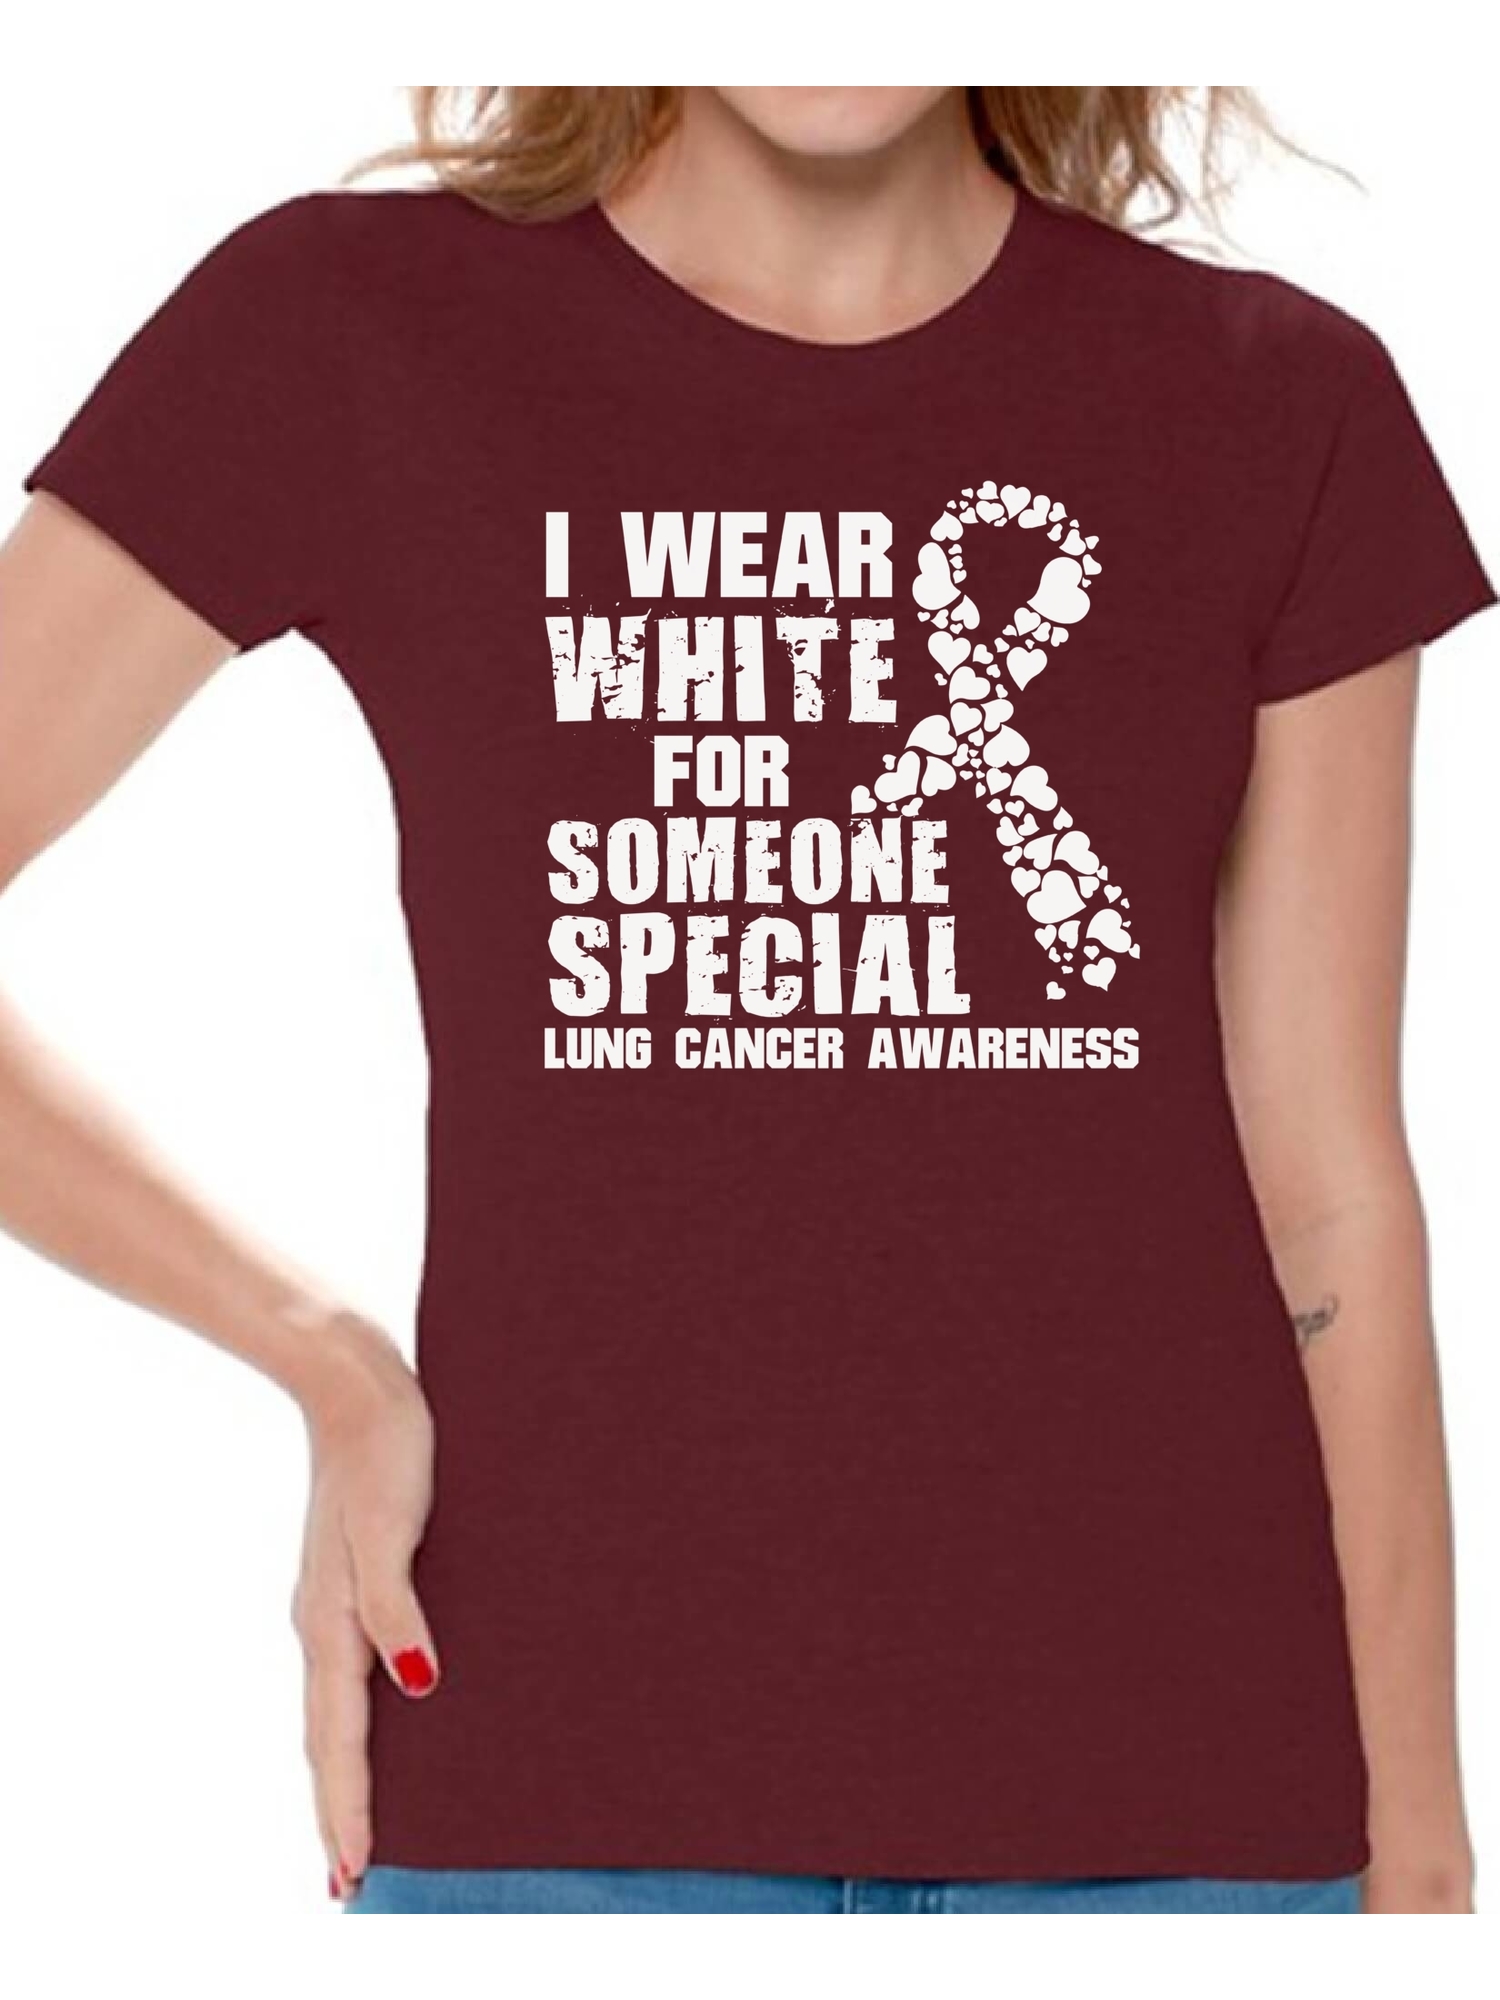 I Wear White for Someone Special T-shirt Top Cancer t shirt lung cancer awareness t shirt love hope fight believe support survive survivor gifts tackle for my mom dad grandpa grandma for men for women - image 1 of 4